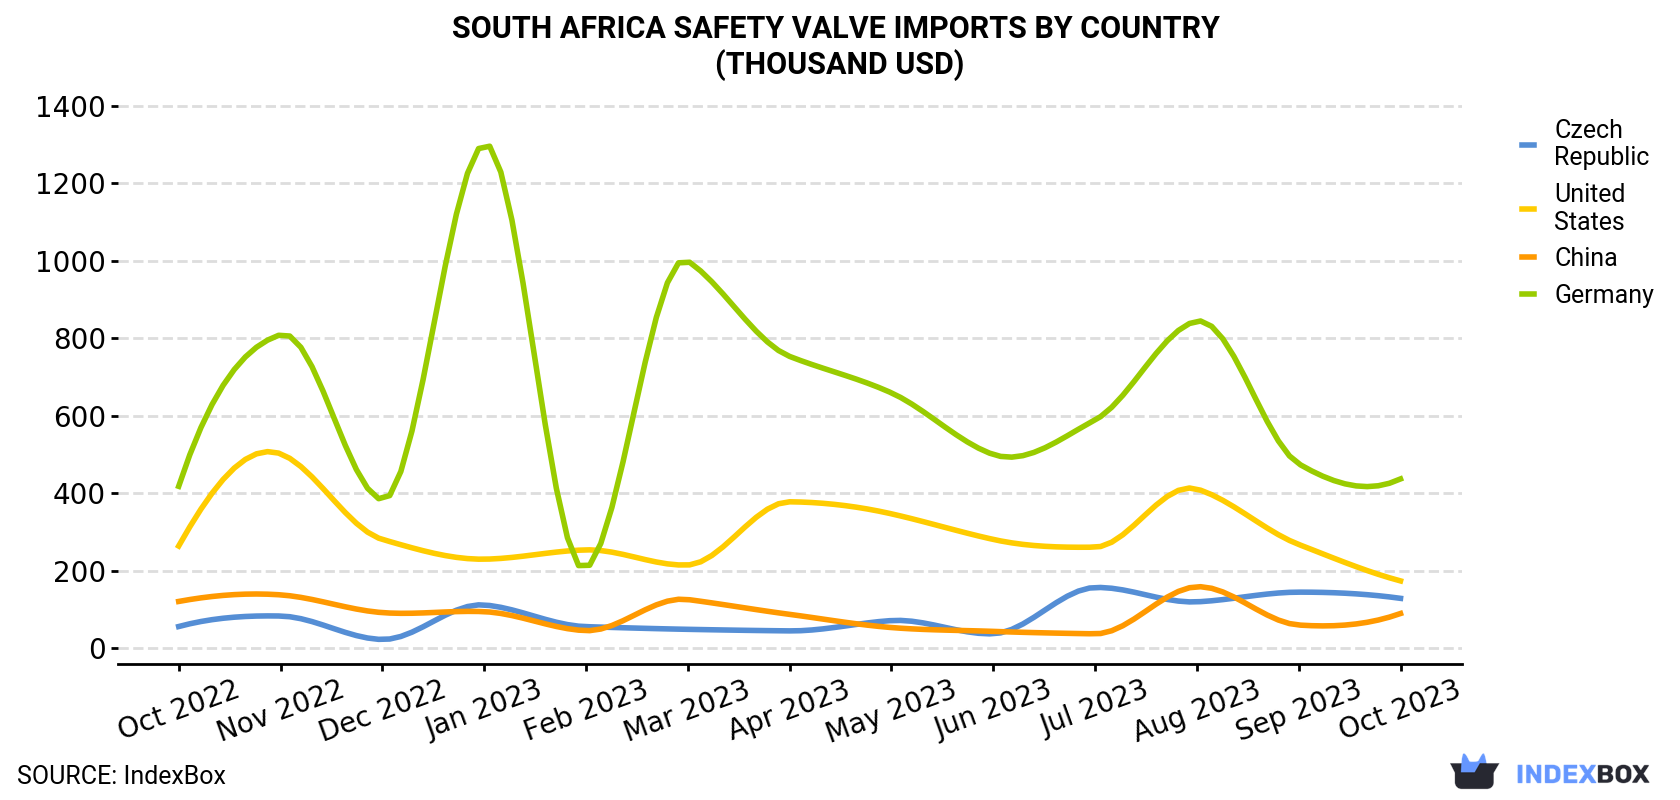 South Africa Safety Valve Imports By Country (Thousand USD)